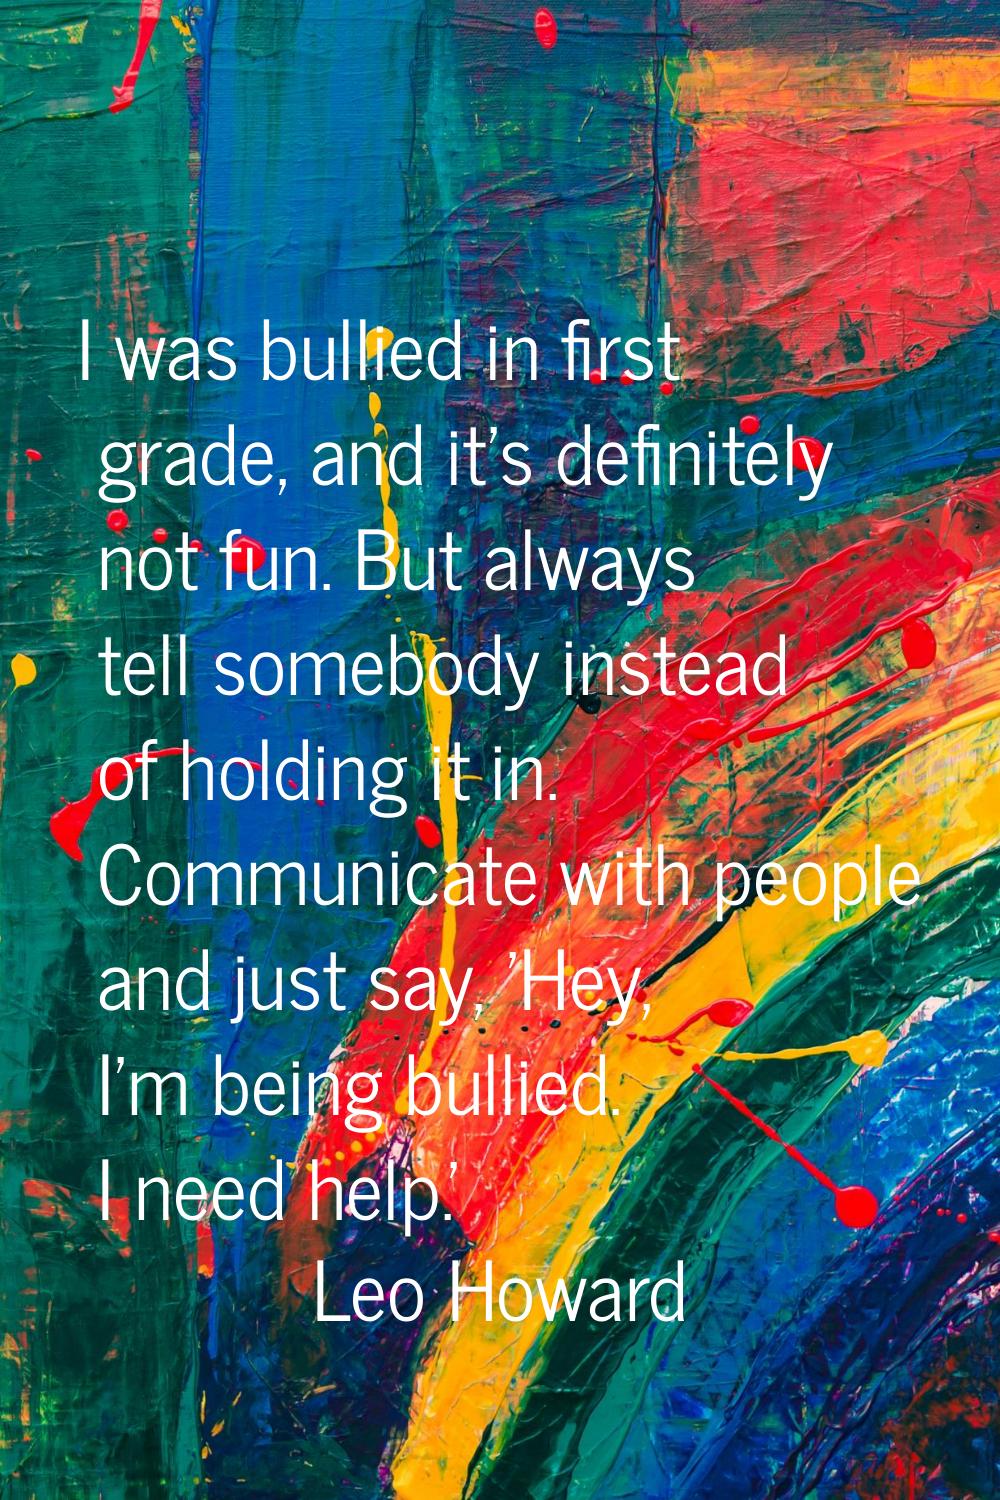 I was bullied in first grade, and it's definitely not fun. But always tell somebody instead of hold